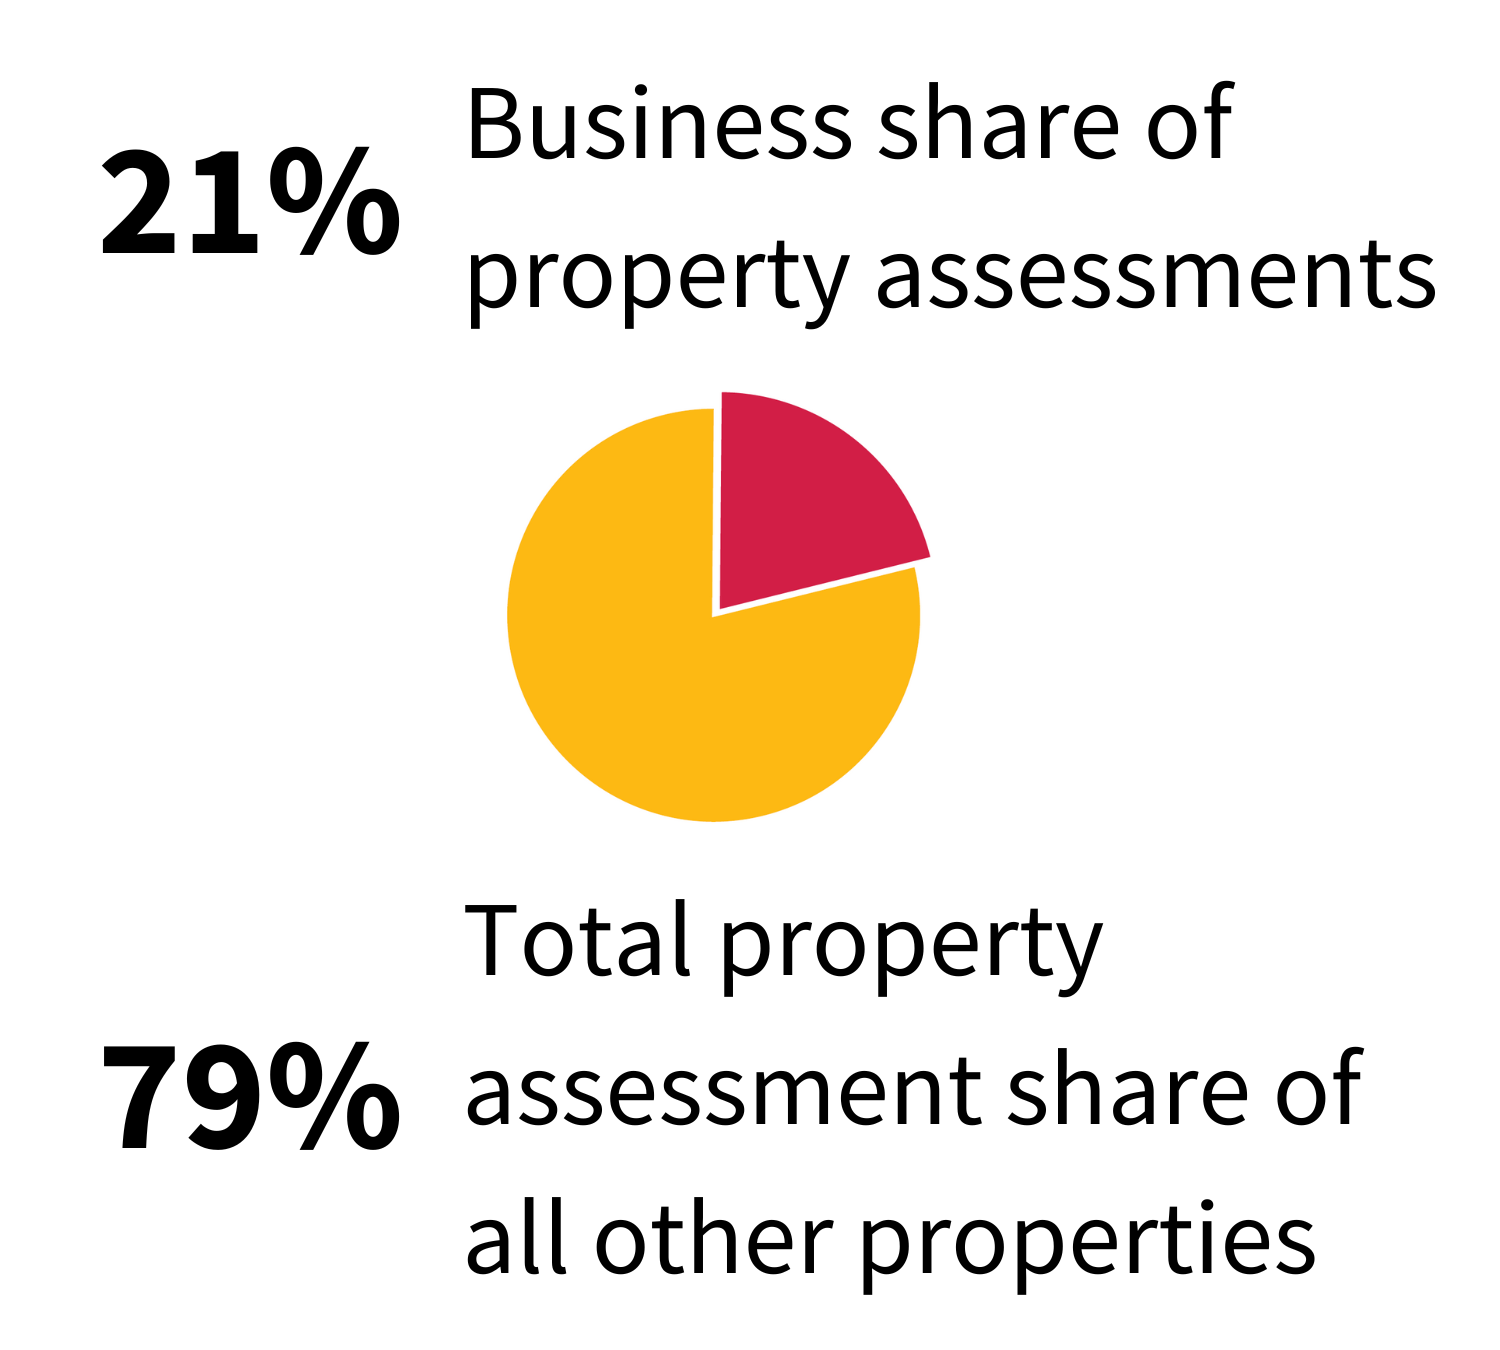 Image of a pie chart showing 1. 79% for Total property assessment share of all other properties 2. 21% for Business share of property assessments